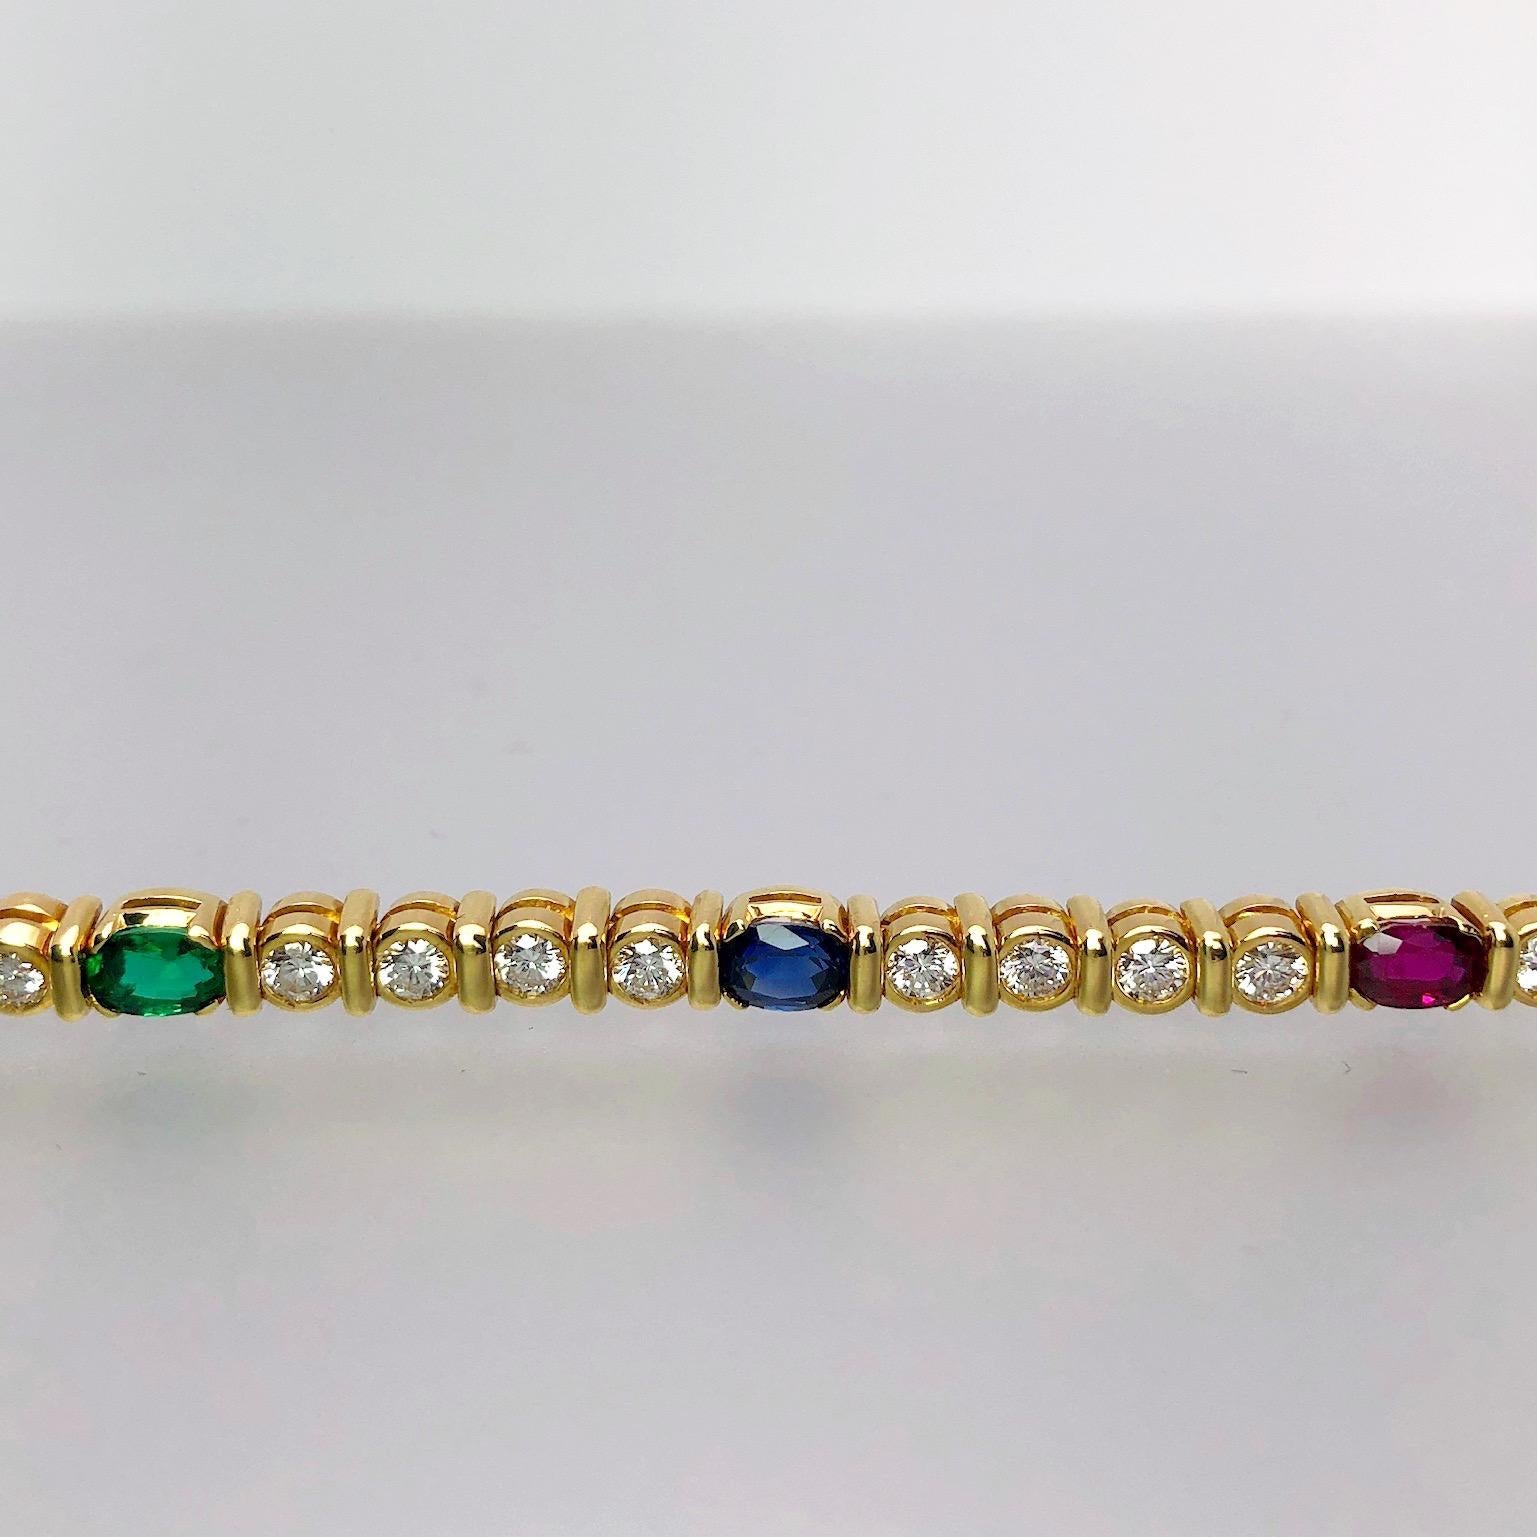 Barzizza 18KT Yellow Gold Bracelet with Diamonds, Rubies, Emeralds and Sapphires In New Condition For Sale In New York, NY